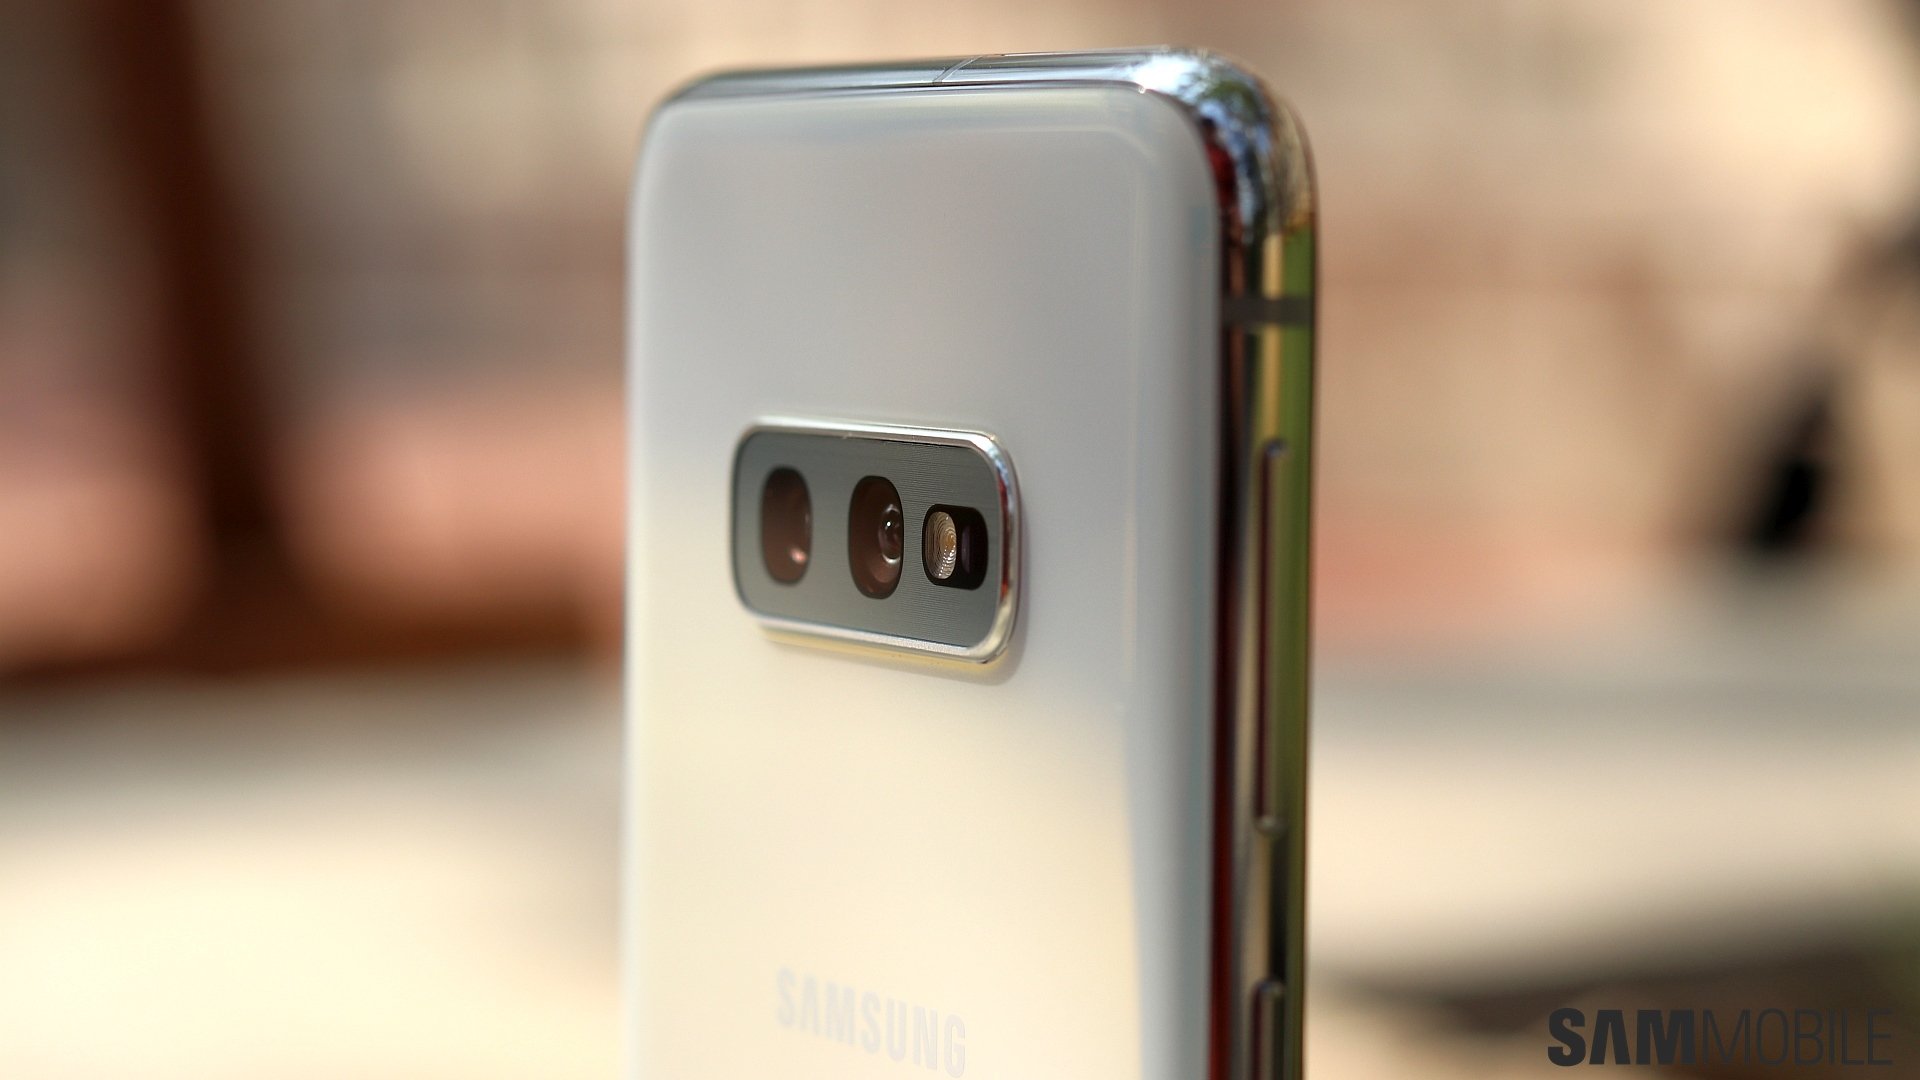 5 things about Samsung's Galaxy S10e that might surprise you